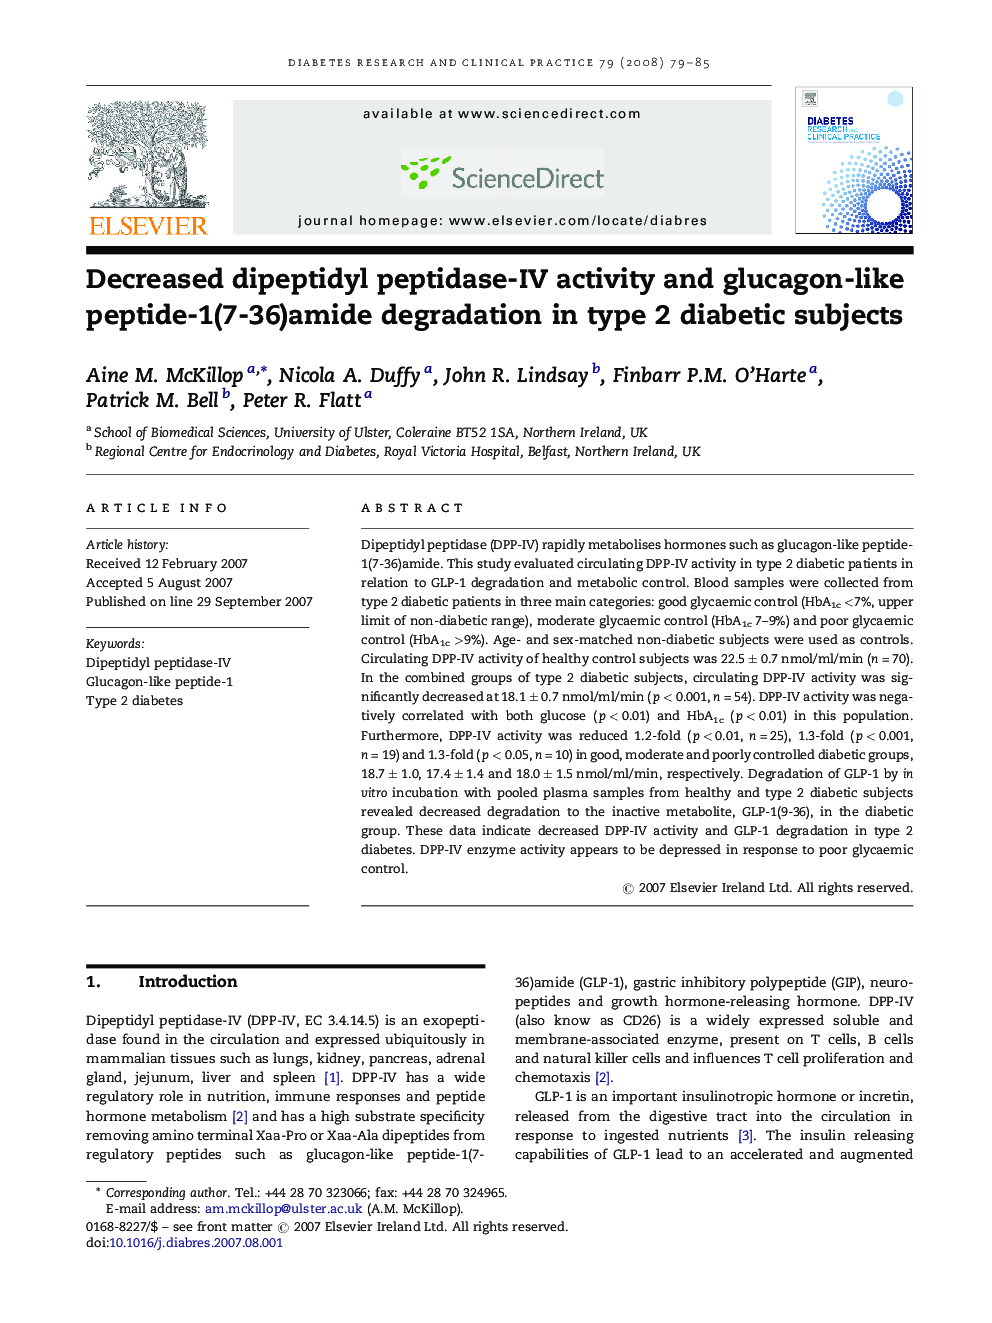 Decreased dipeptidyl peptidase-IV activity and glucagon-like peptide-1(7-36)amide degradation in type 2 diabetic subjects